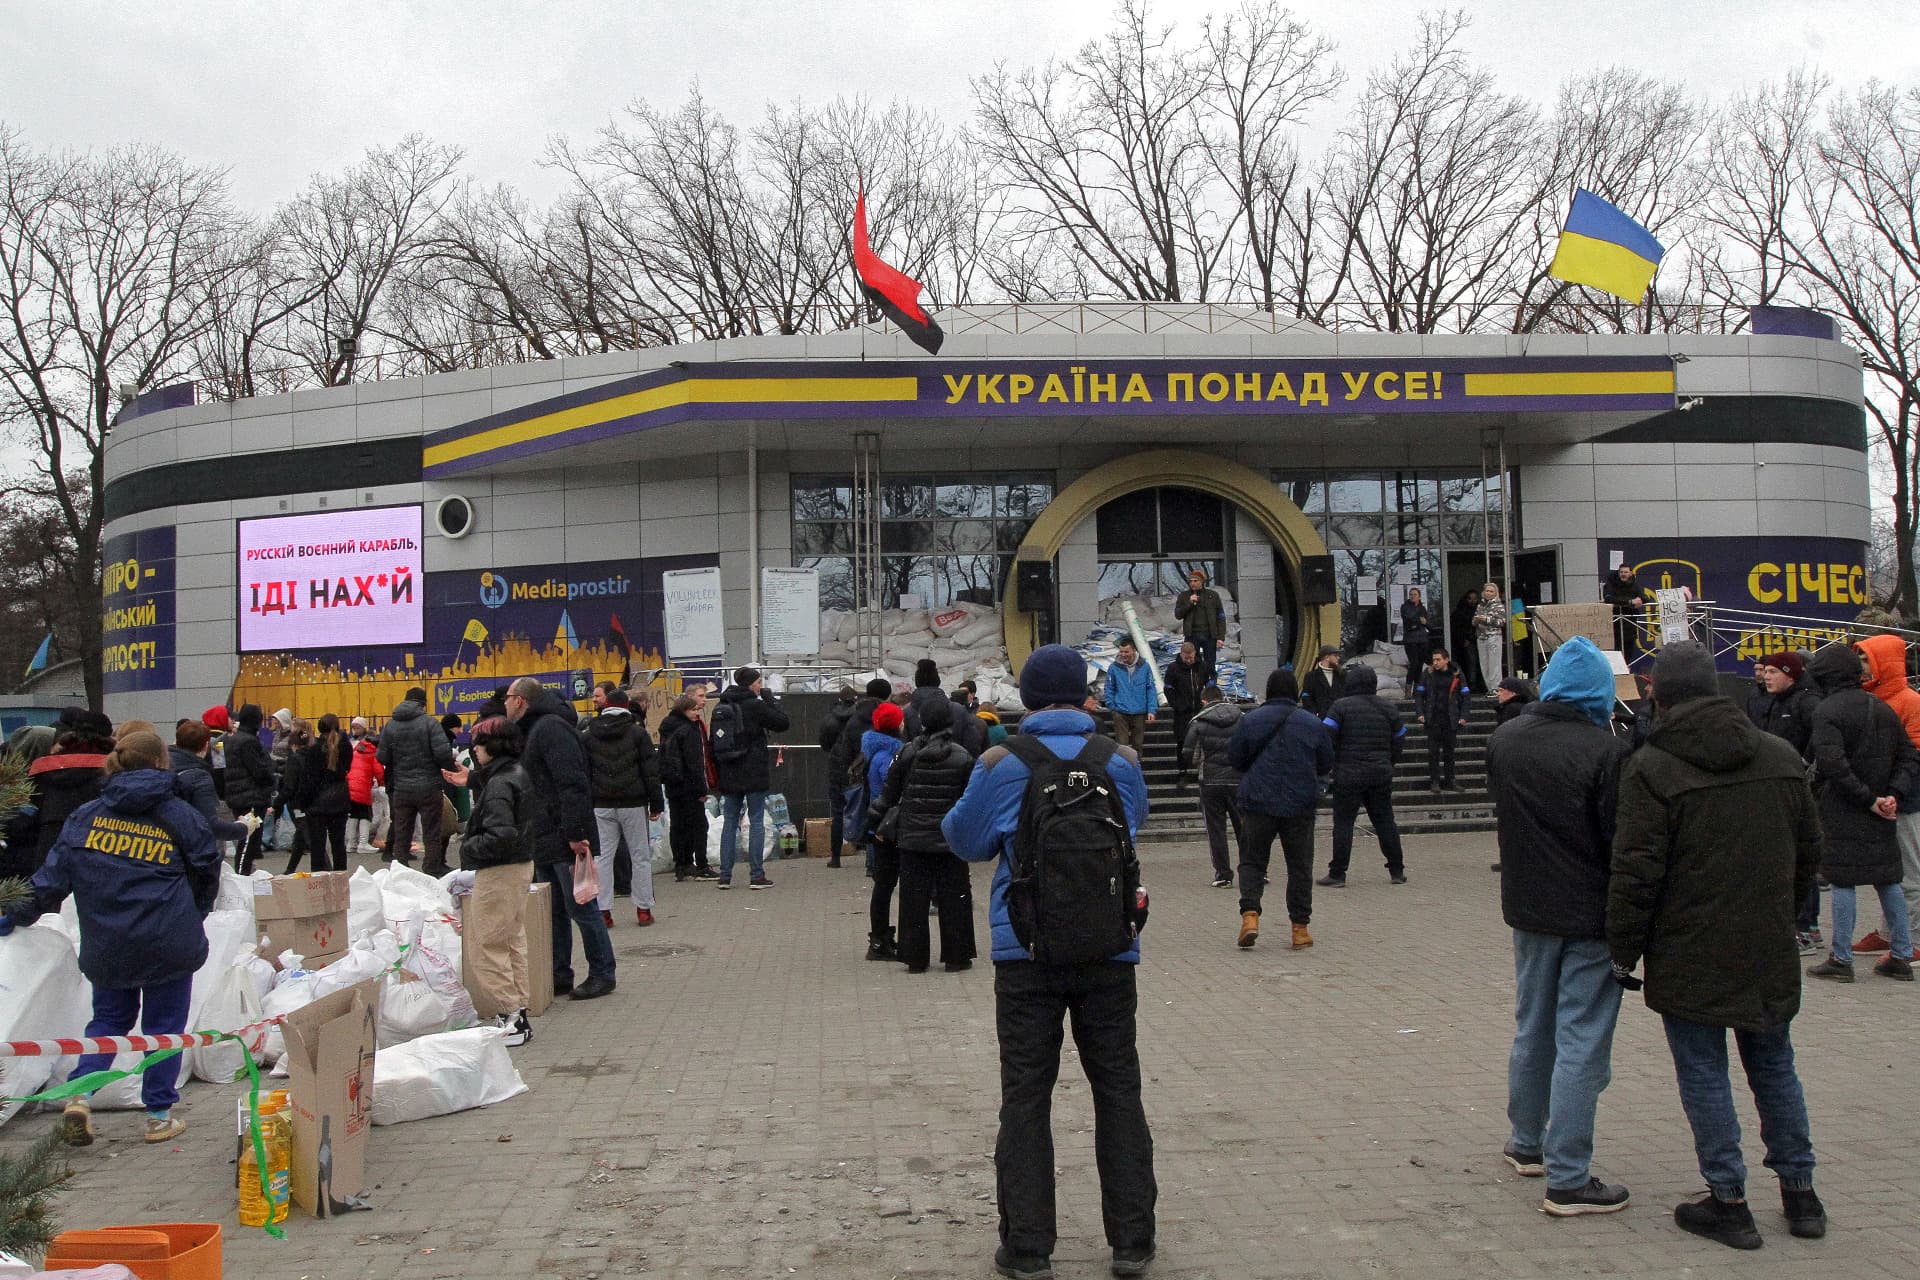 People crowd outside the volunteer and mobilization point set up in the Media Space building near the Dnipropetrovsk Regional State Administration, Dnipro, central Ukraine